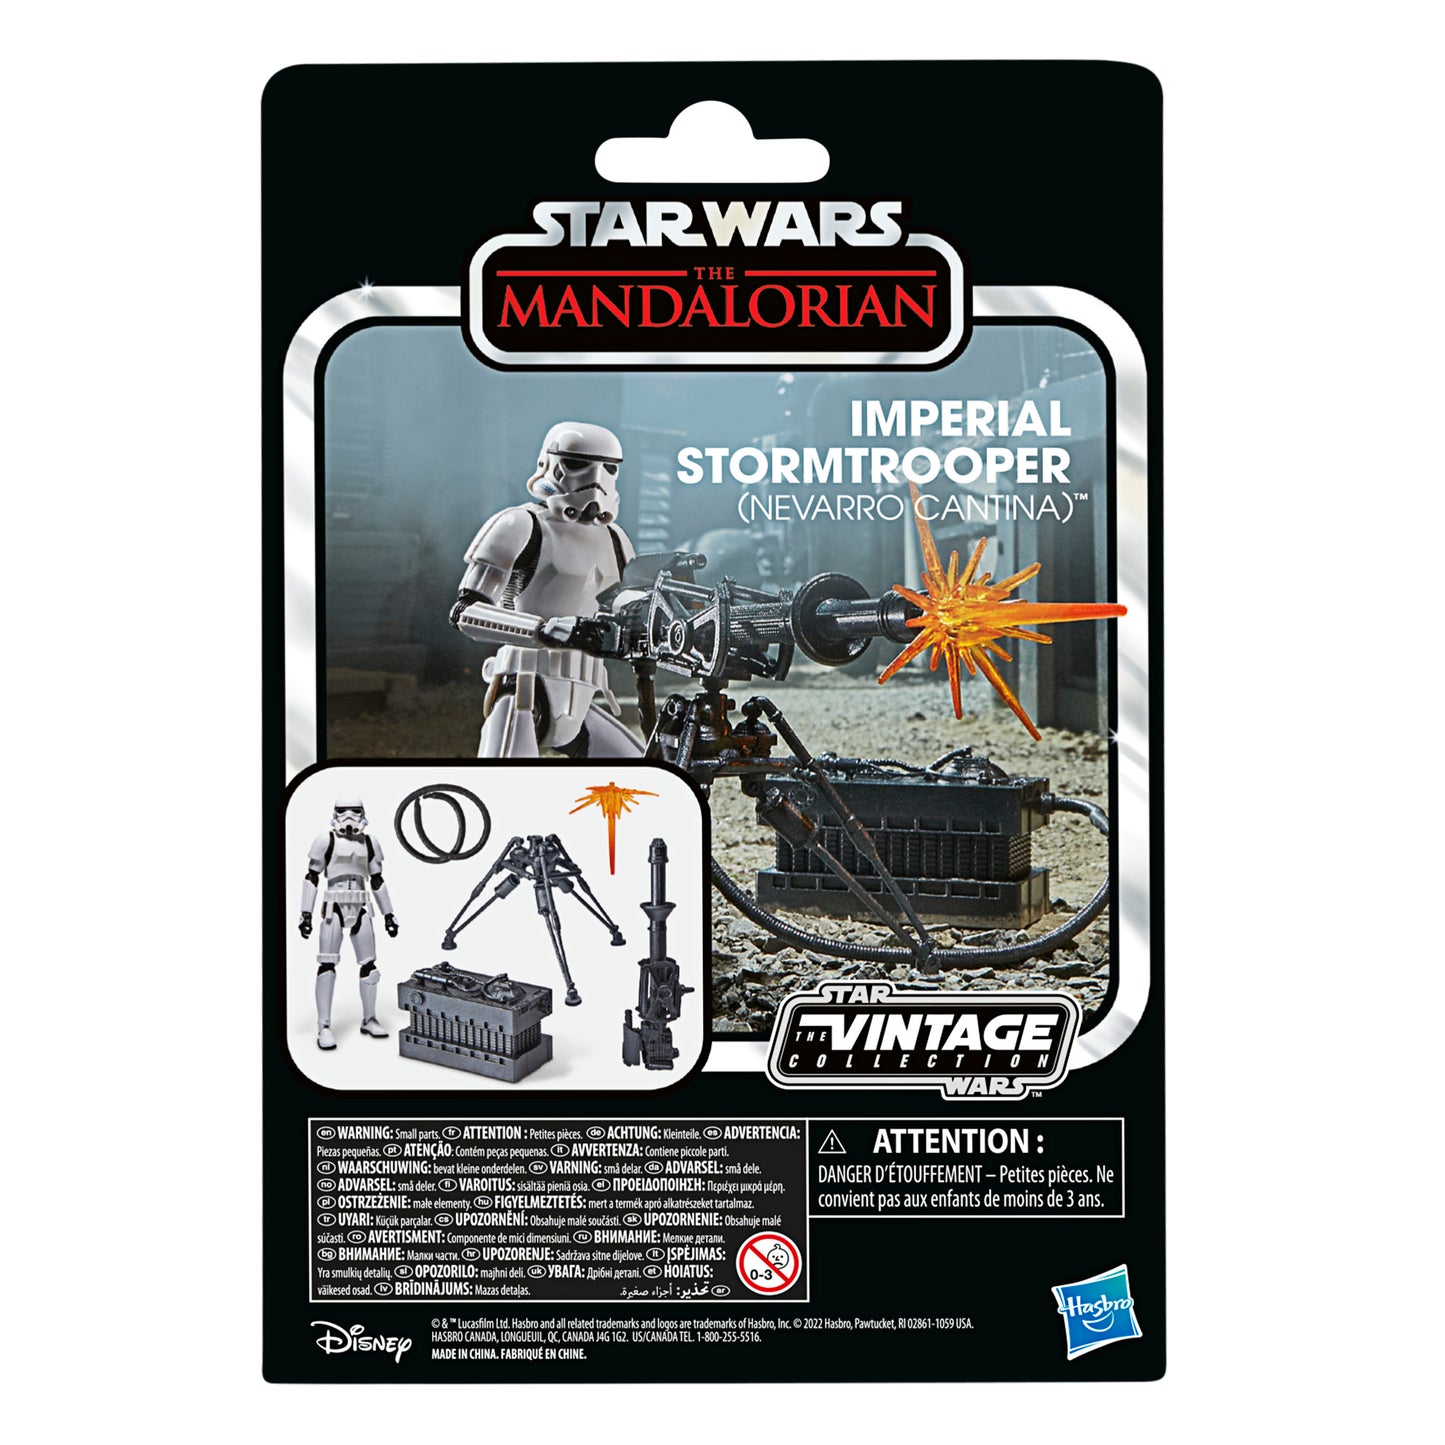 Star Wars The Vintage Collection Deluxe Imperial Stormtrooper (Nevarro Cantina) Action Figure Toy - Exclusive - Heretoserveyou